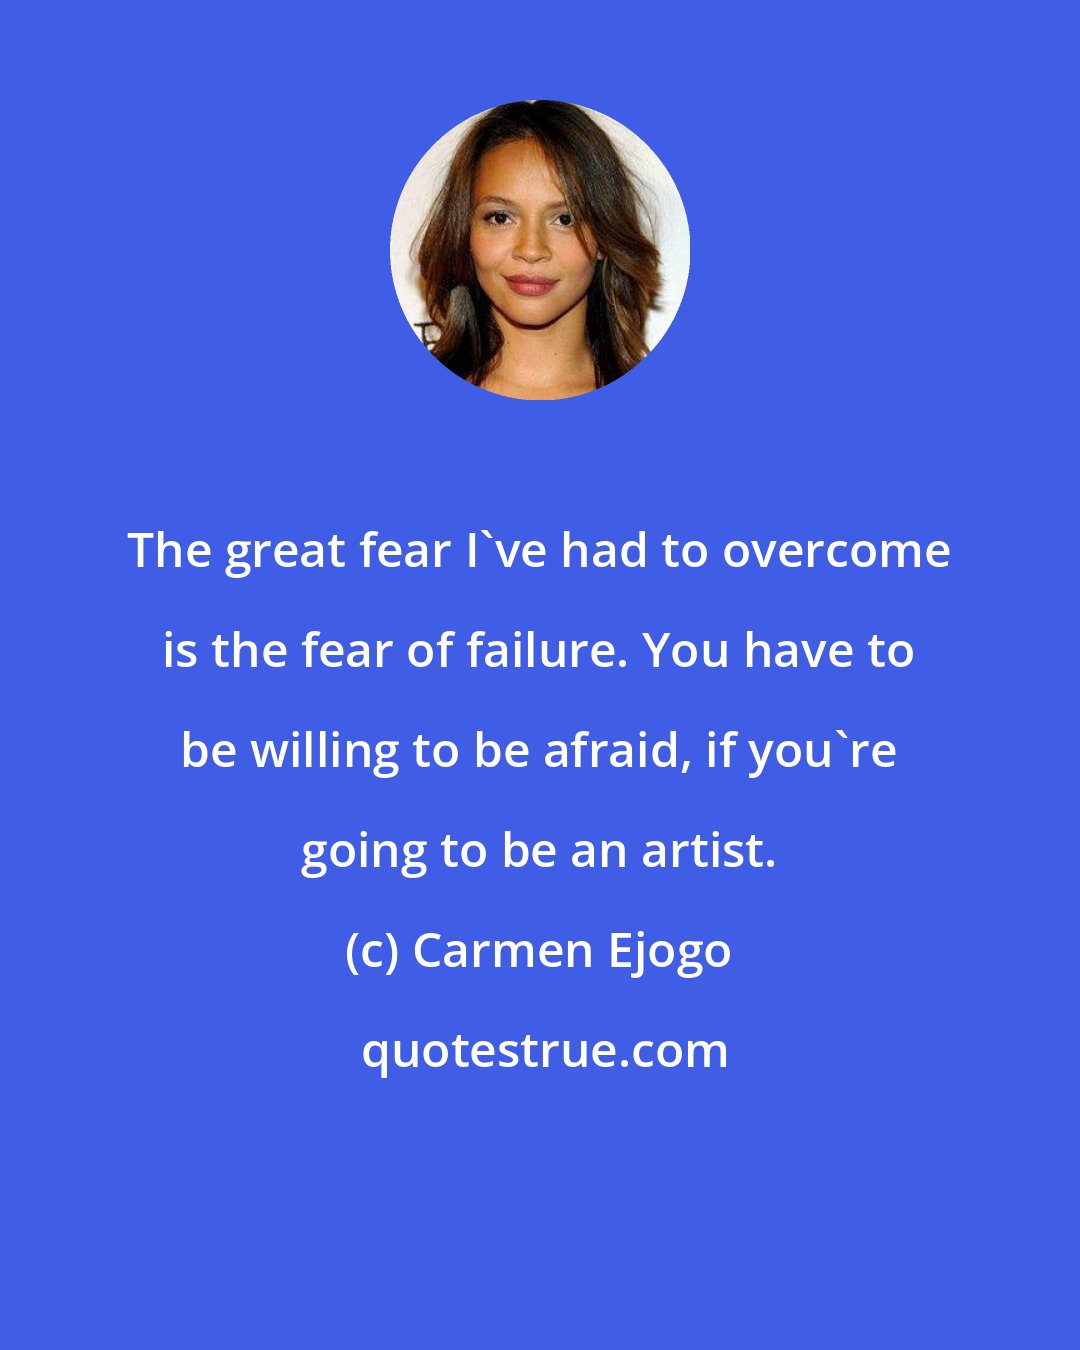 Carmen Ejogo: The great fear I've had to overcome is the fear of failure. You have to be willing to be afraid, if you're going to be an artist.